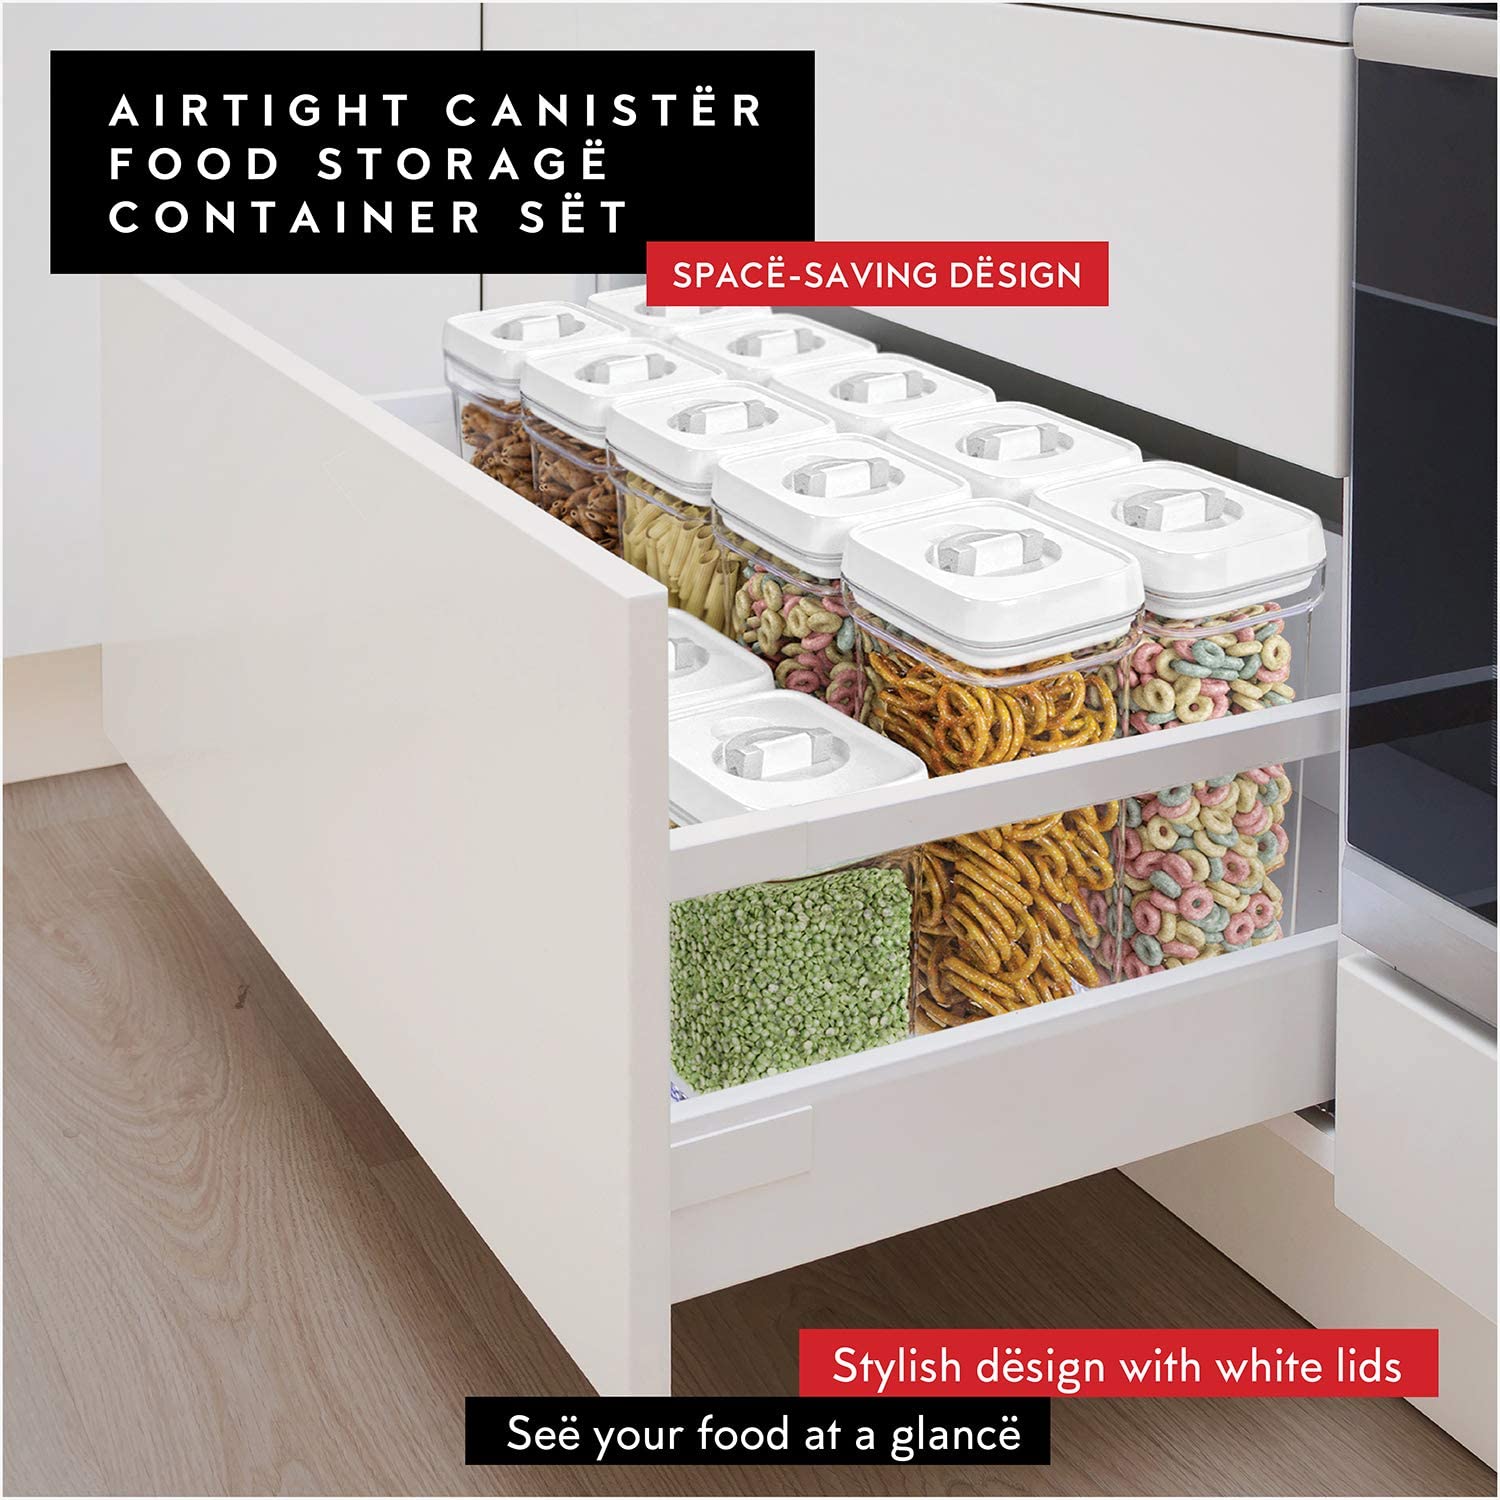 https://cdn.shopify.com/s/files/1/1095/4966/products/FoodCanisters-Tidy4.jpg?v=1620766265